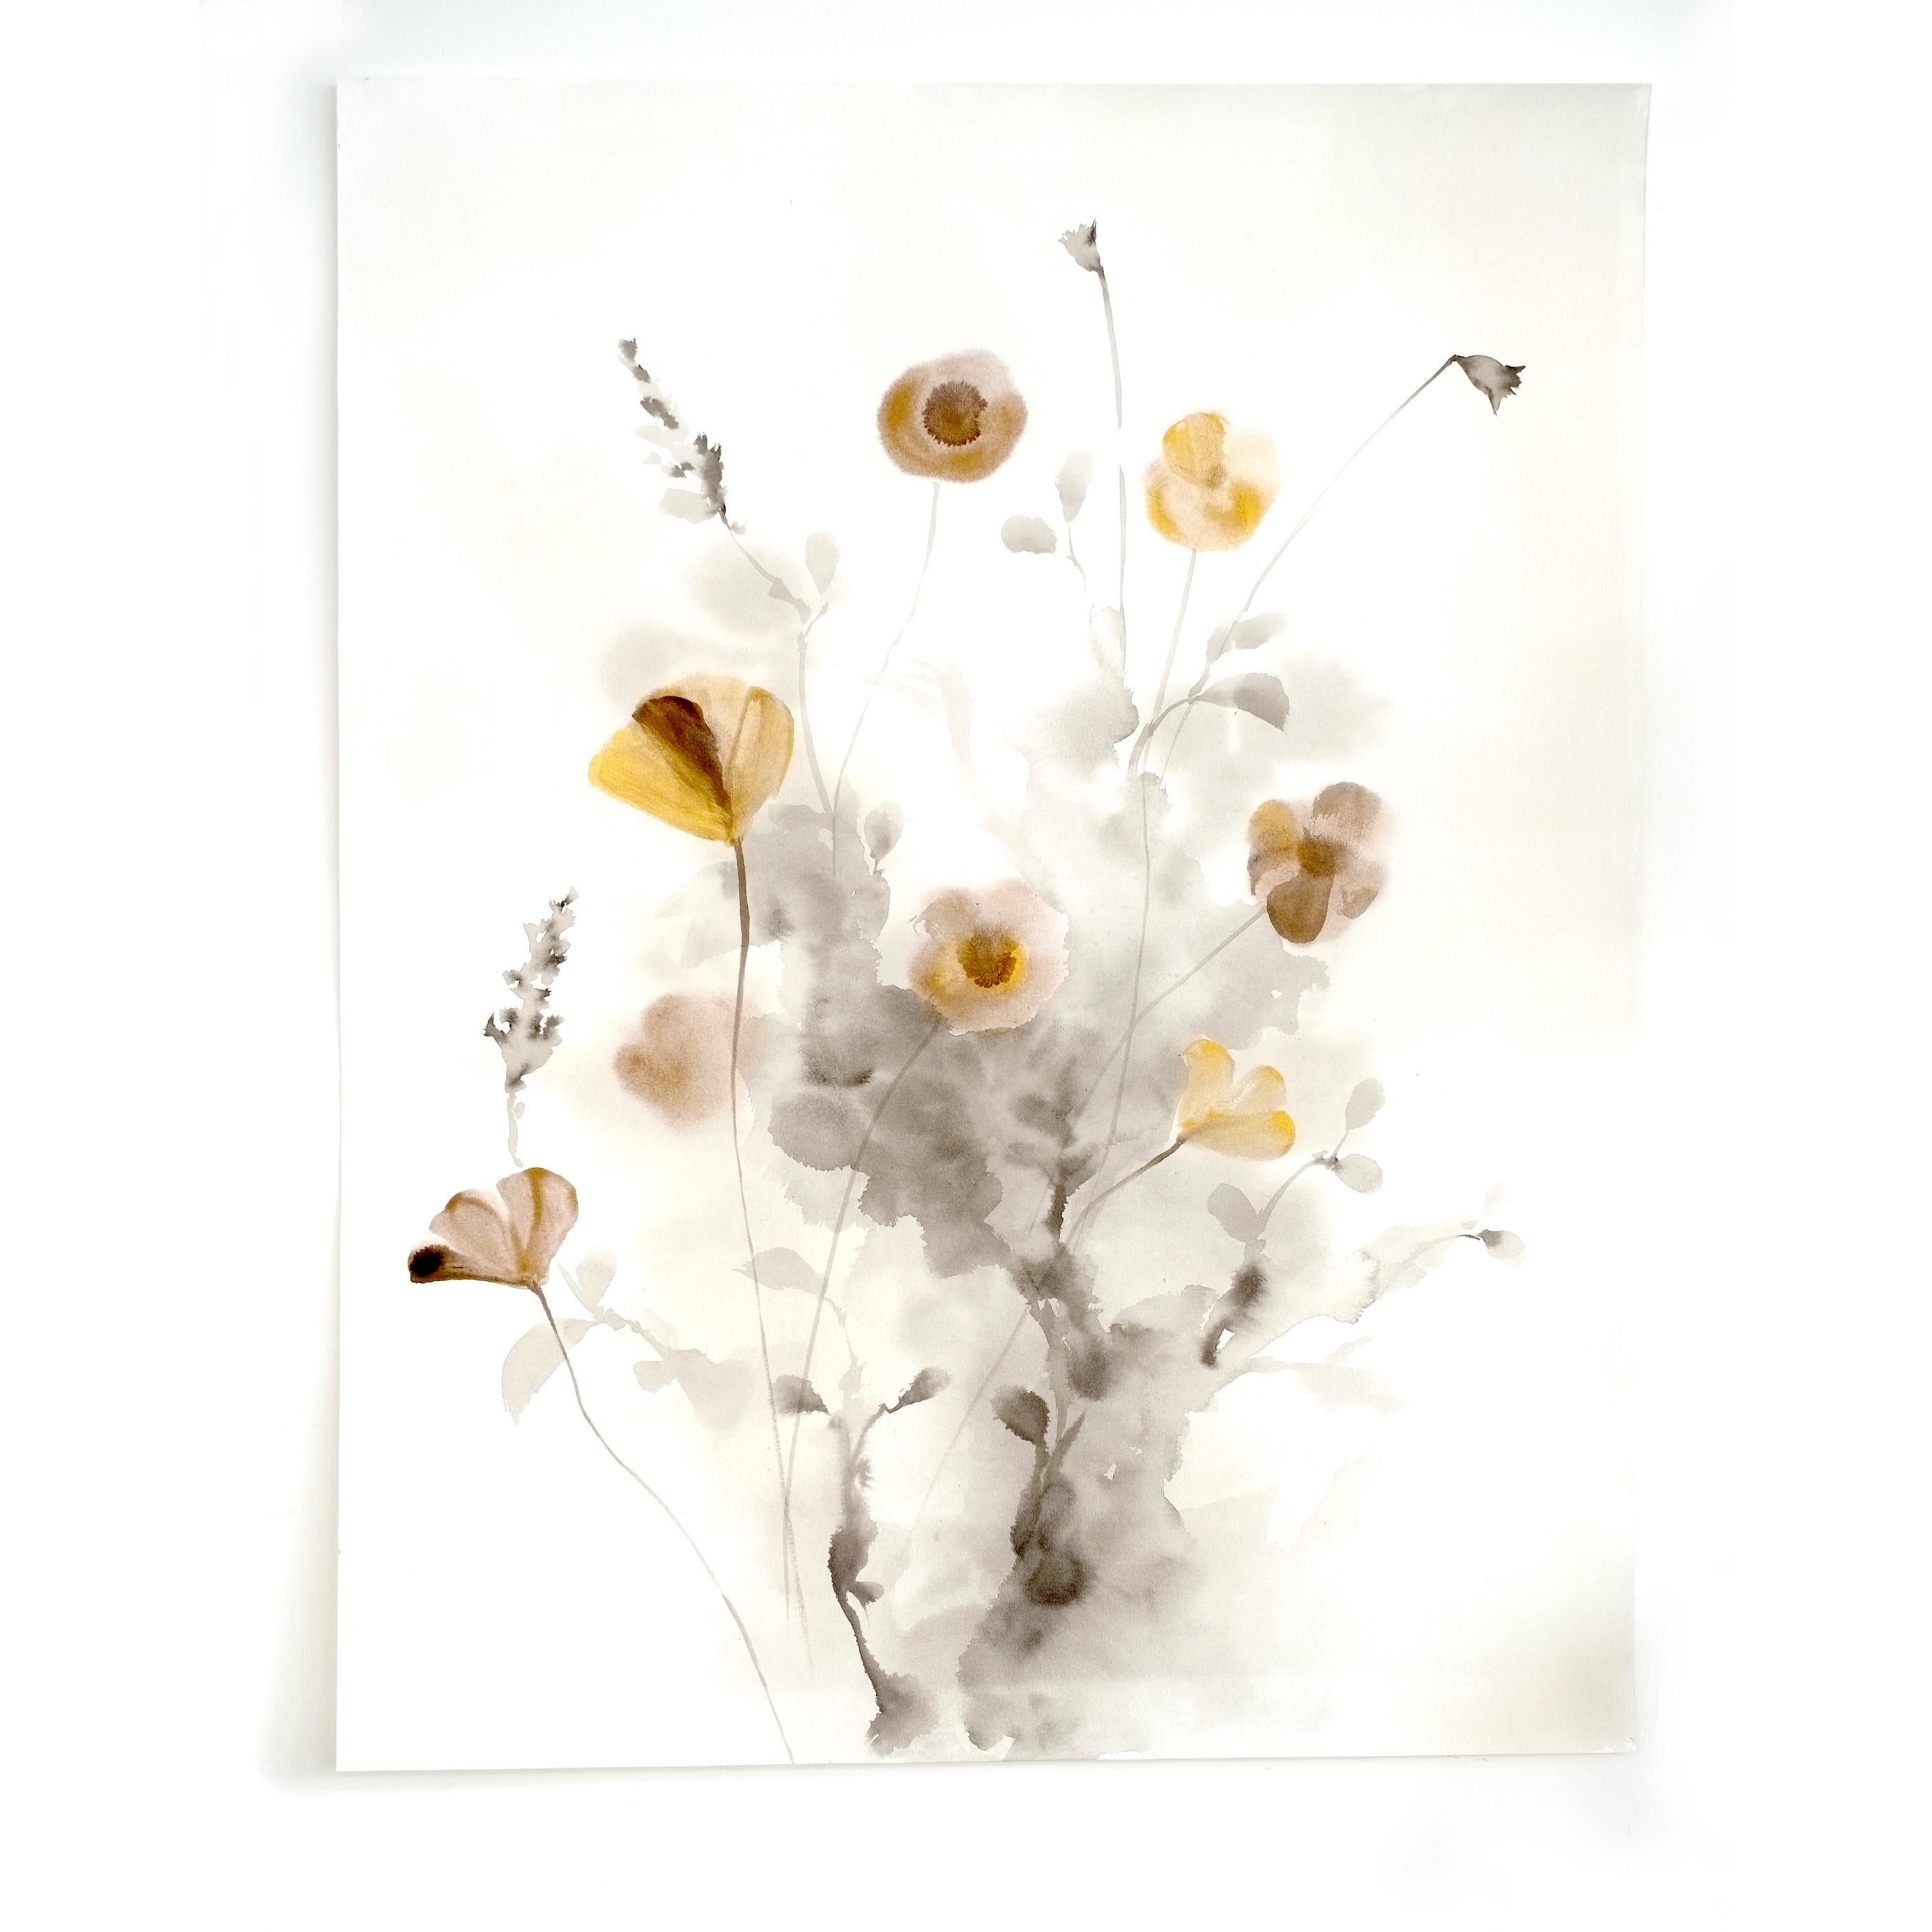 This charming and sophisticated wall decoration has been entirely hand-painted on 100% natural cotton paper, using the sumi-e technique inspired by ancient Korean paintings. Particularly ideal as an eye-catching complement to any decorative style.